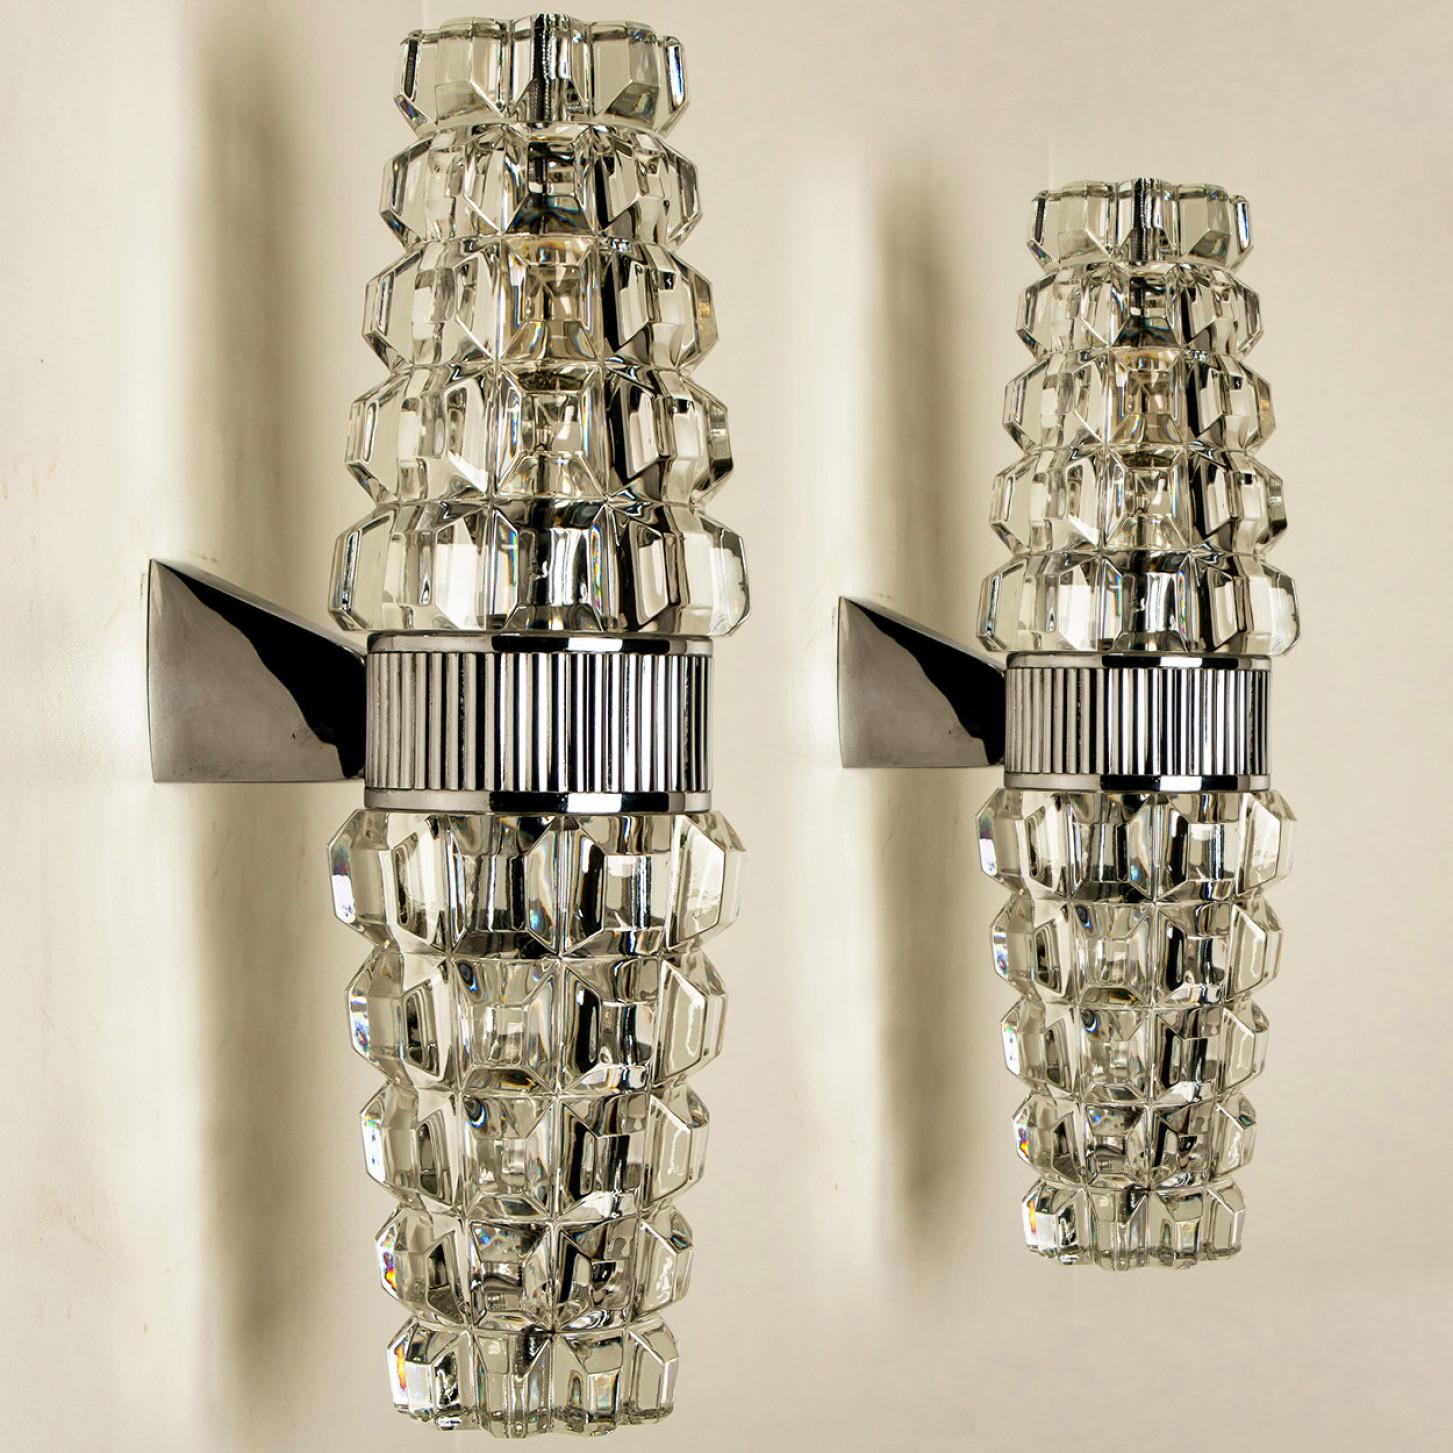 High-end wall sconces, made in France, Europe, around 1970. The wall lights are made of lead crystall and a chrome frame holding the glass.

Dimensions:
Height: 13.78 inch (35 cm)
Width: 3.94 inch (10 cm)
Depth: 5.9 inch (15 cm)
Please notice the